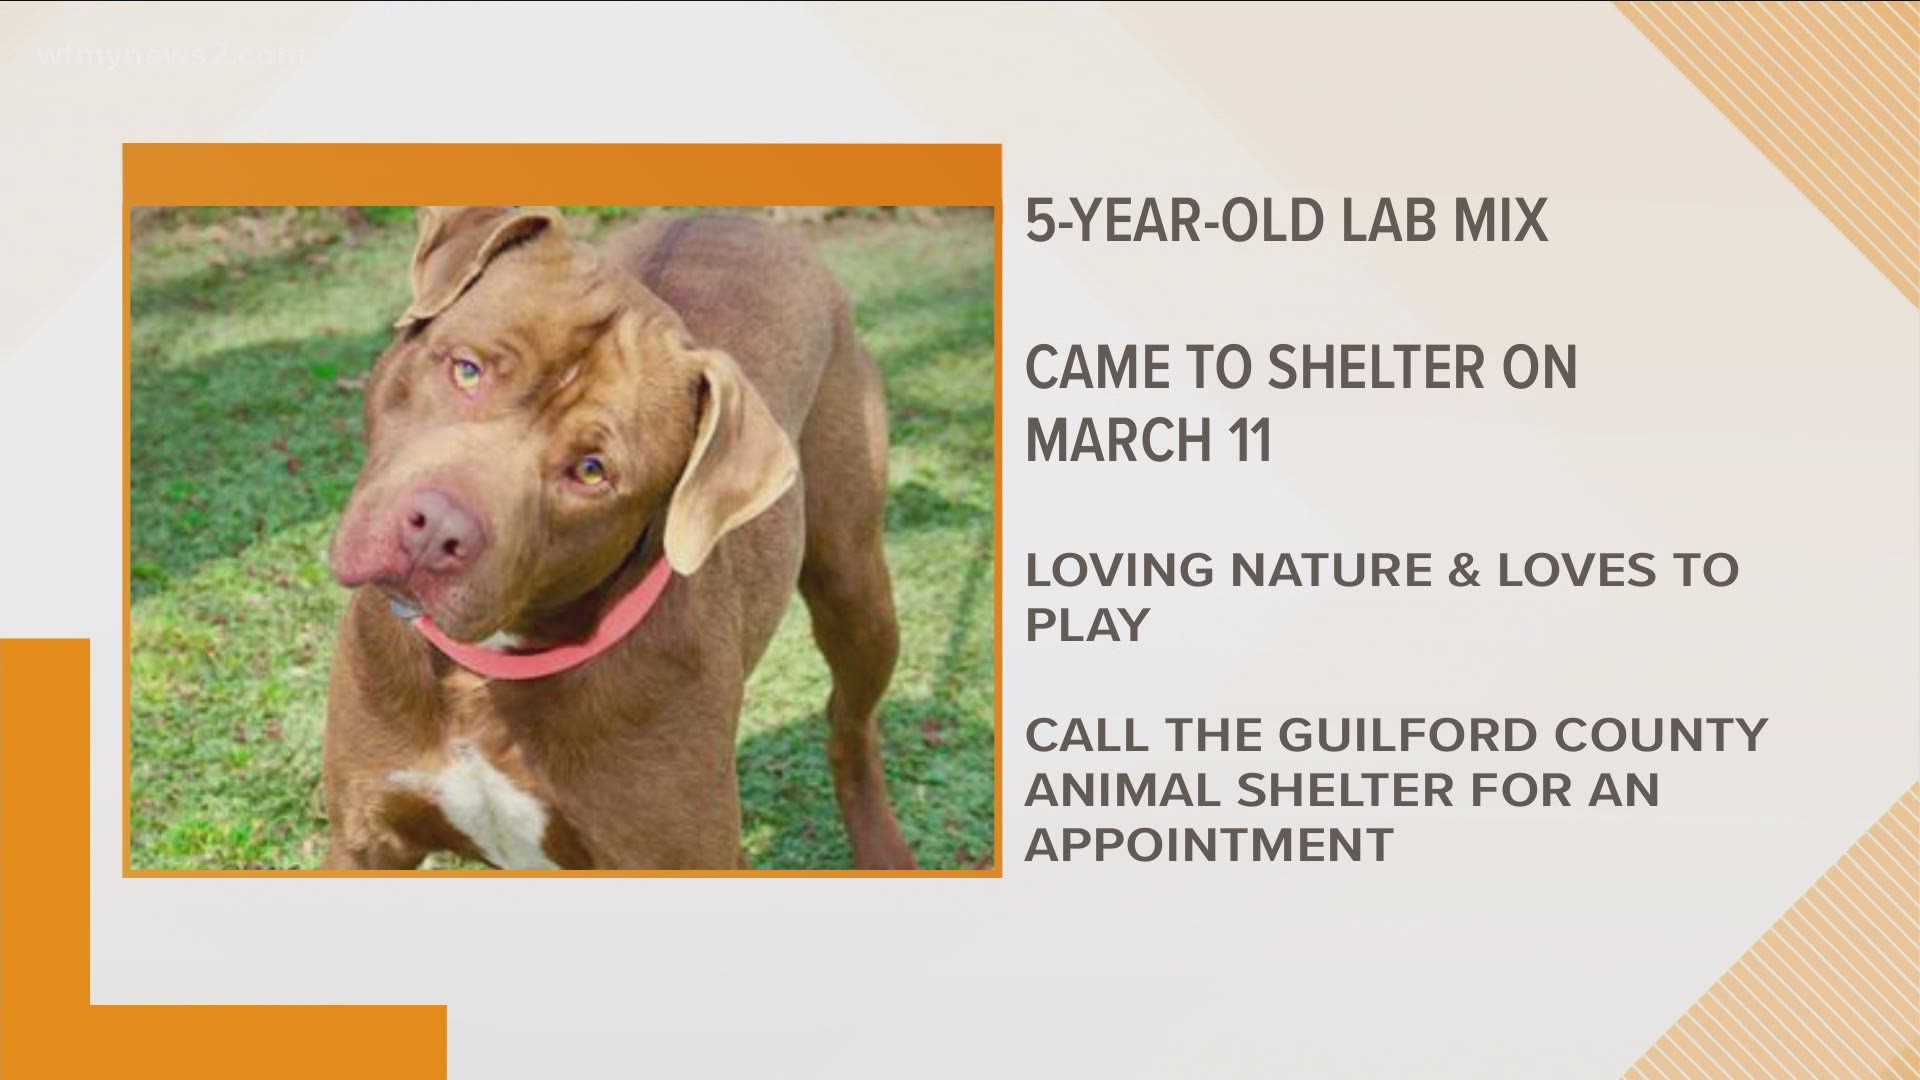 This 5-year-old dog has been at the Guilford County Animal Shelter since March.